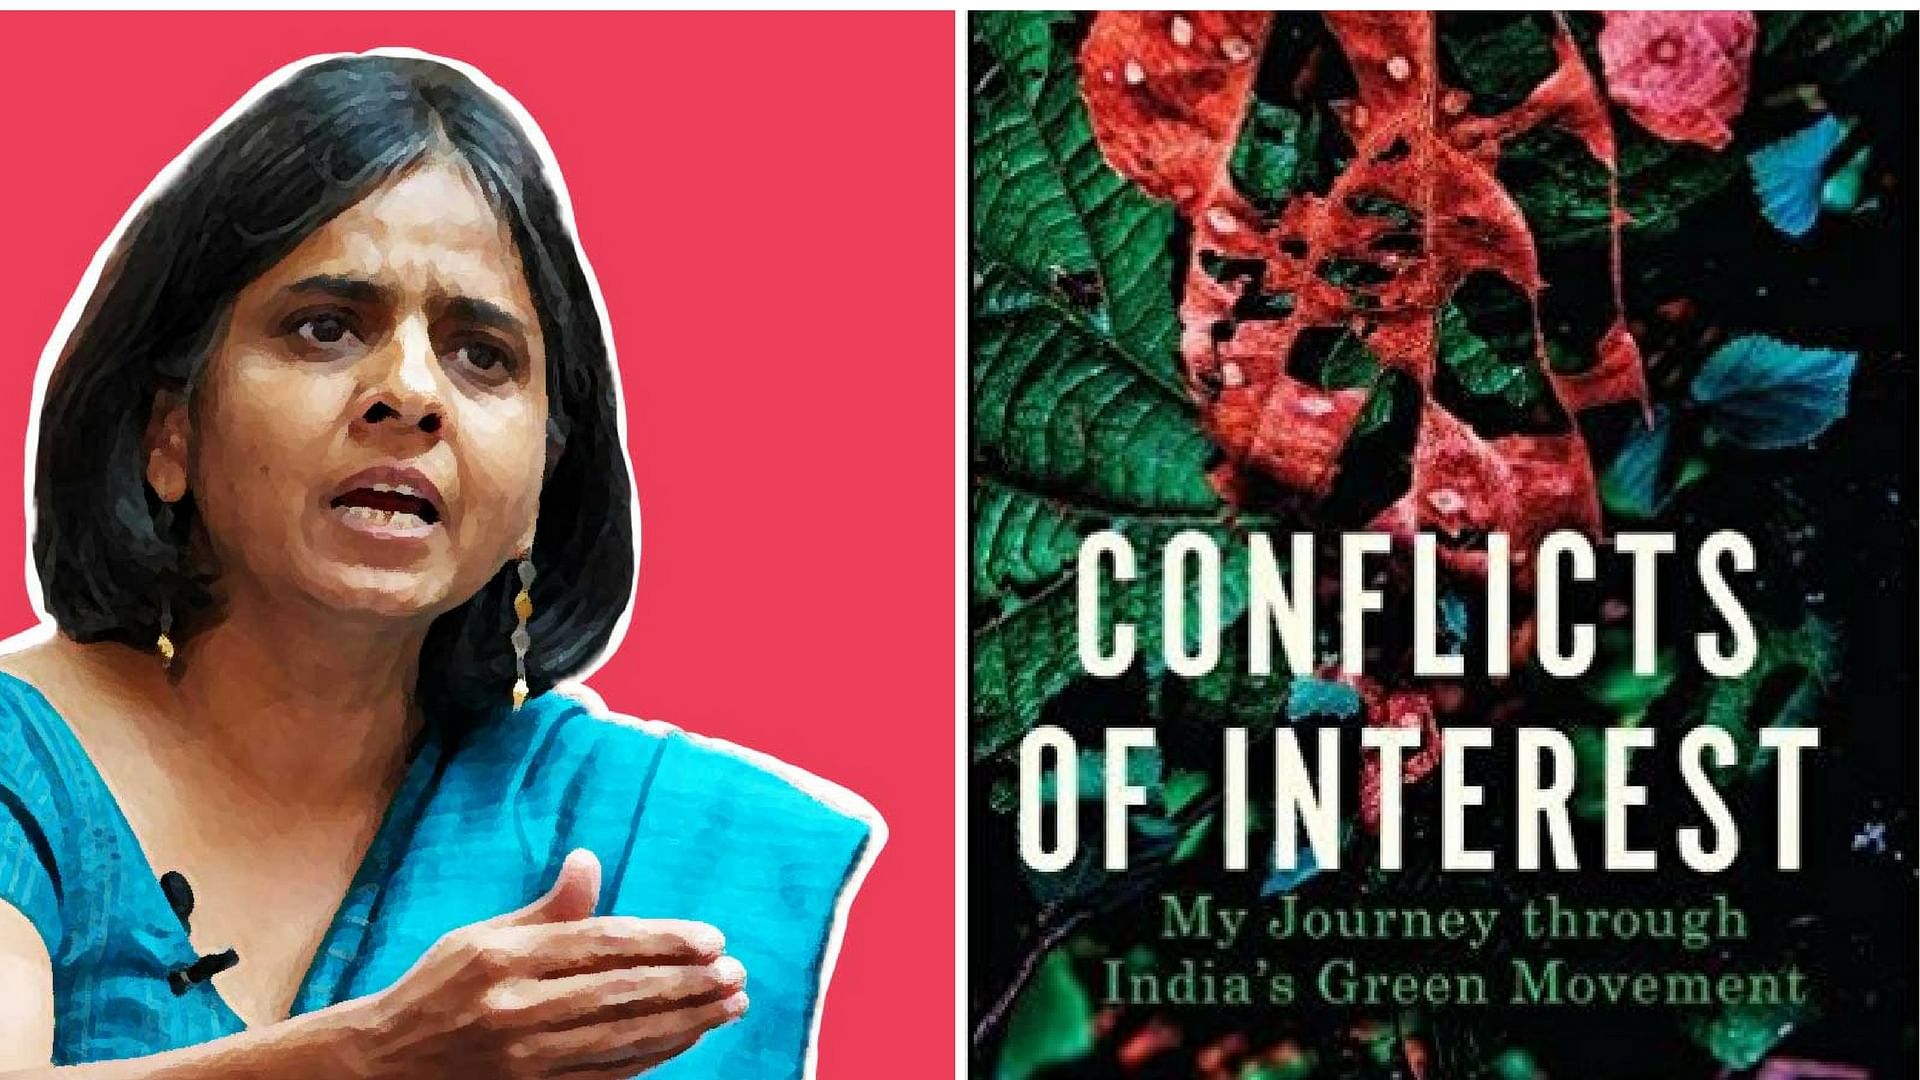 Sunita Narain’s ‘Conflicts of Interest’ looks at major environmental issues in the country like air pollution, waste management, climate change and pesticides in aerated drinks in a historical context